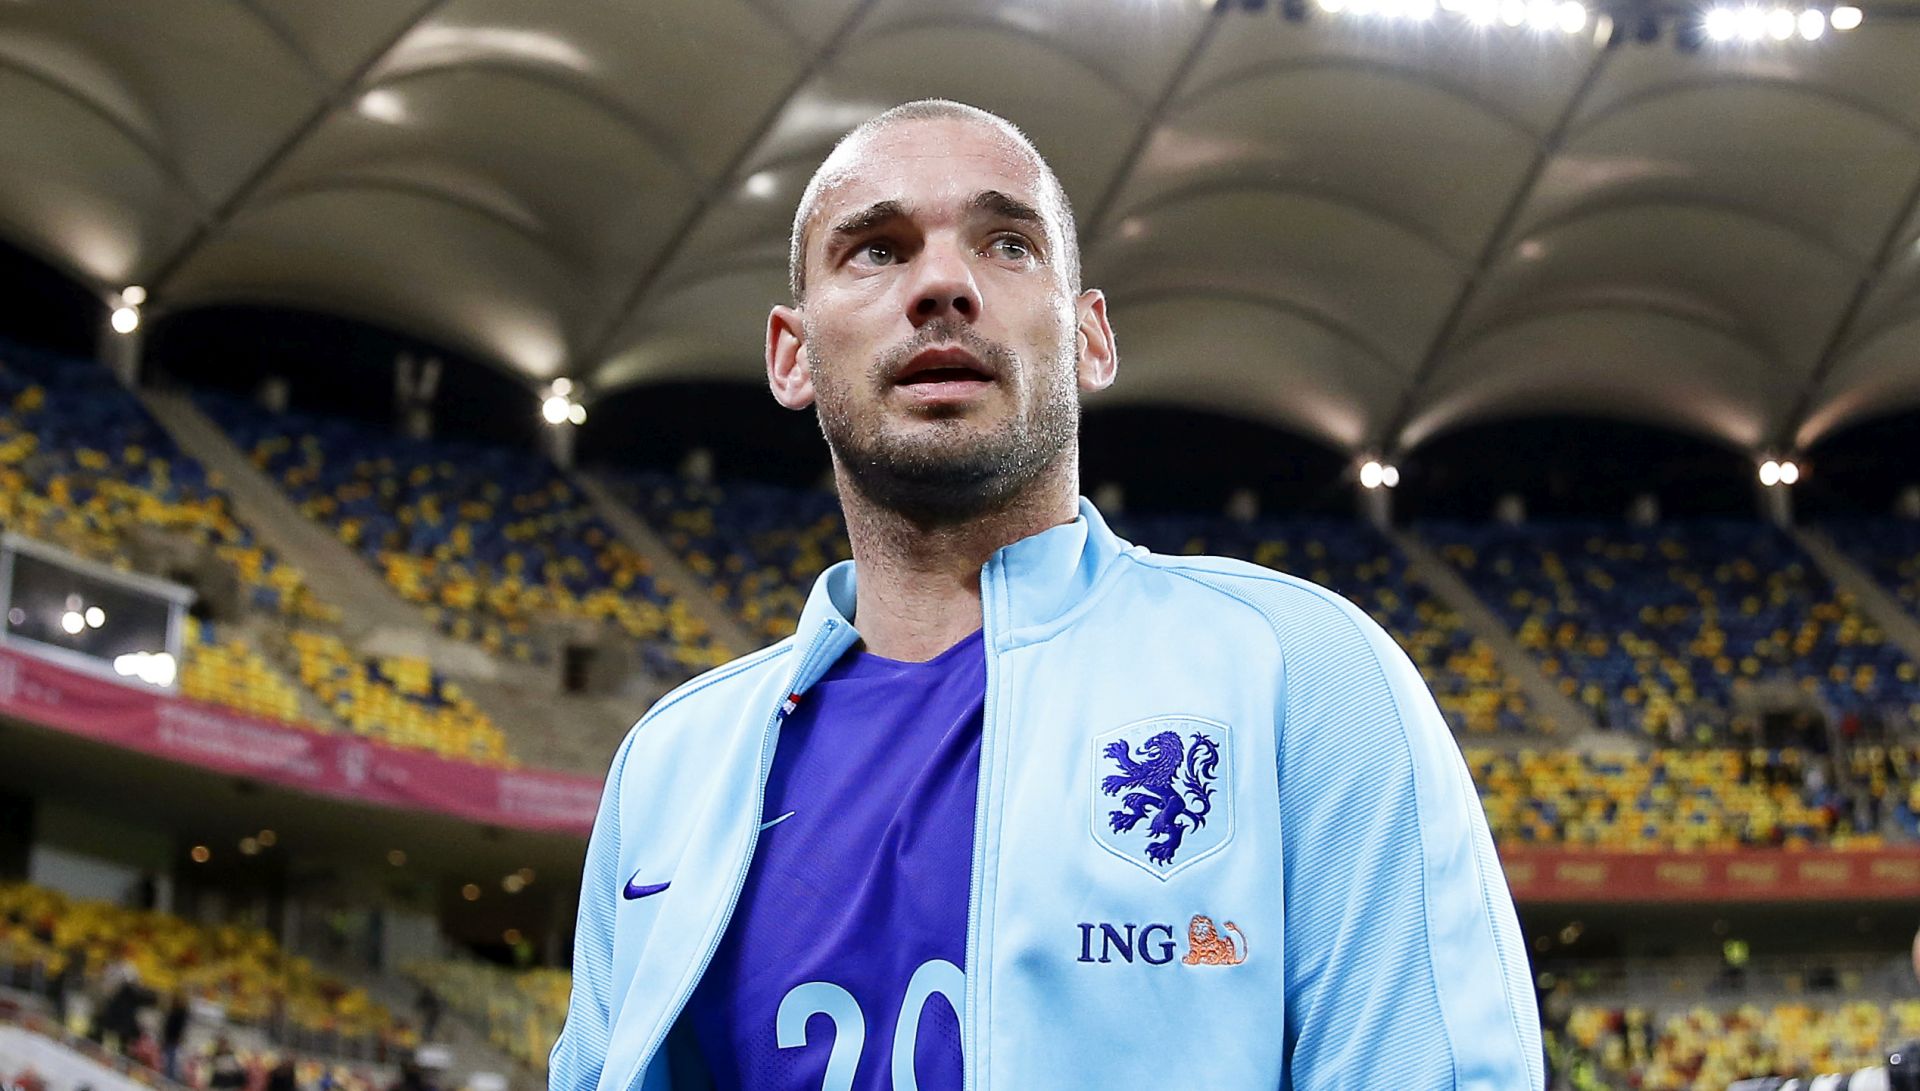 epa07770488 (FILE) - Wesley Sneijder of the Netherlands reacts after the International Friendly soccer match between Romania and the Netherlands at National Arena stadium in Bucharest, Romania, 14 November 2017 (reissued on 12 August 2019). Sneijder announced on 12 August 2019 on FC Utrecht official television his decision to retire from professional soccer and that he will work with the Dutch Eredivisie club.  EPA/ROBERT GHEMENT *** Local Caption *** 53897155